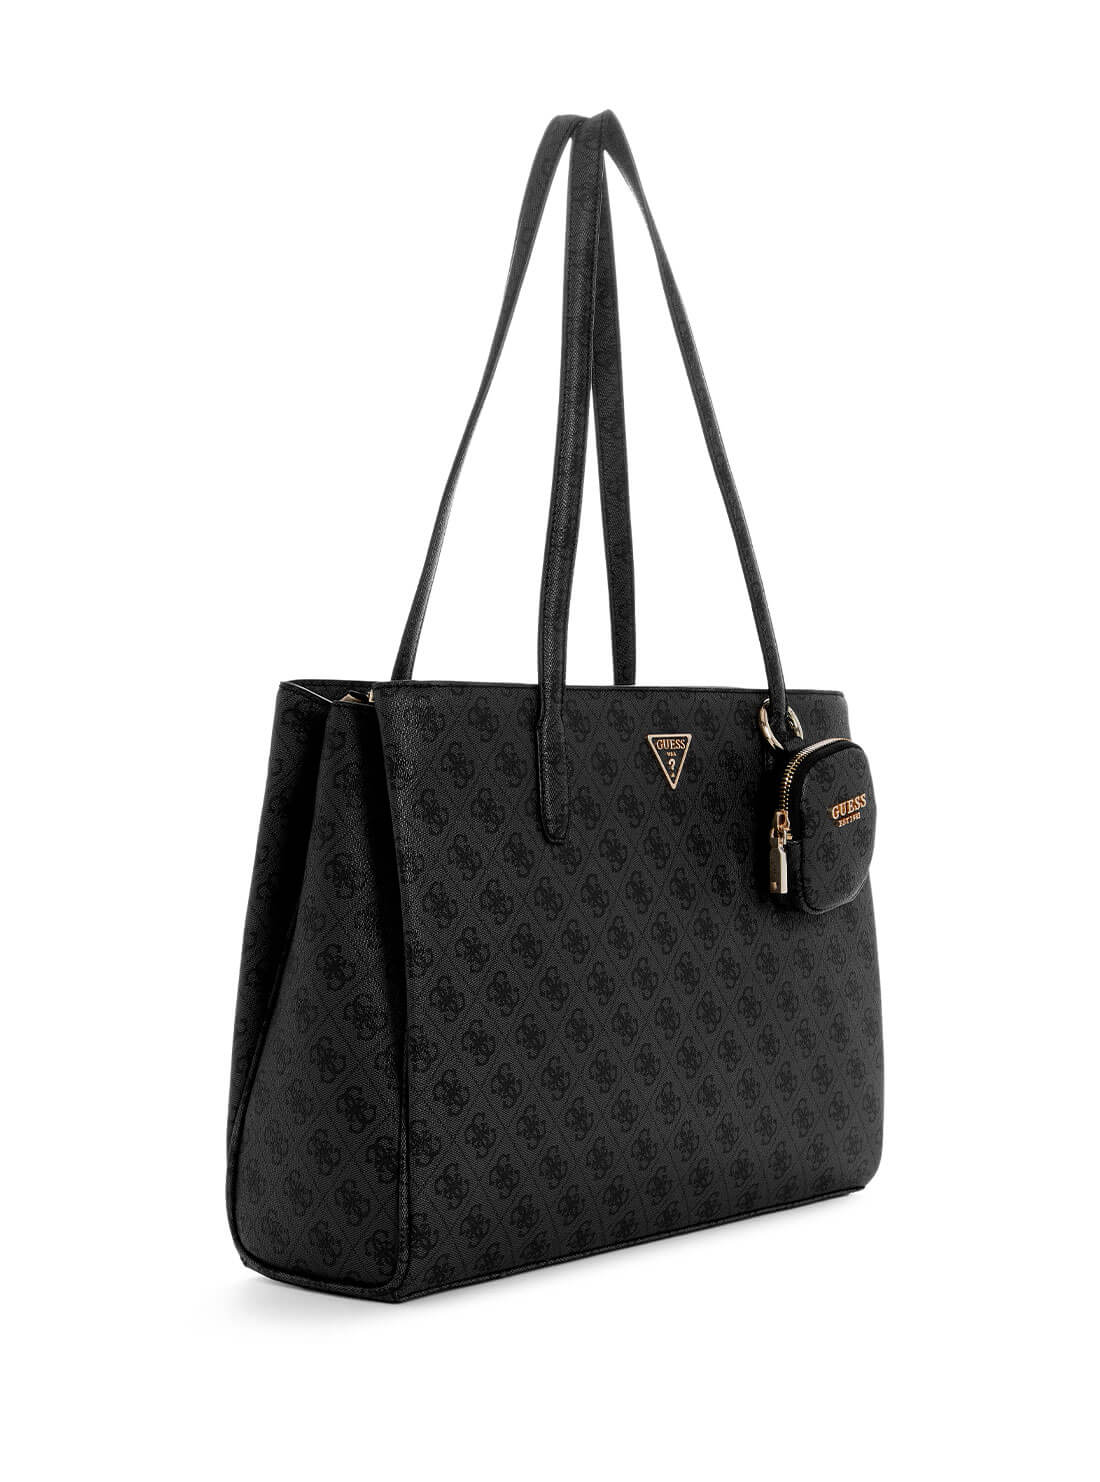 GUESS Black Logo Power Play Tote Bag side view